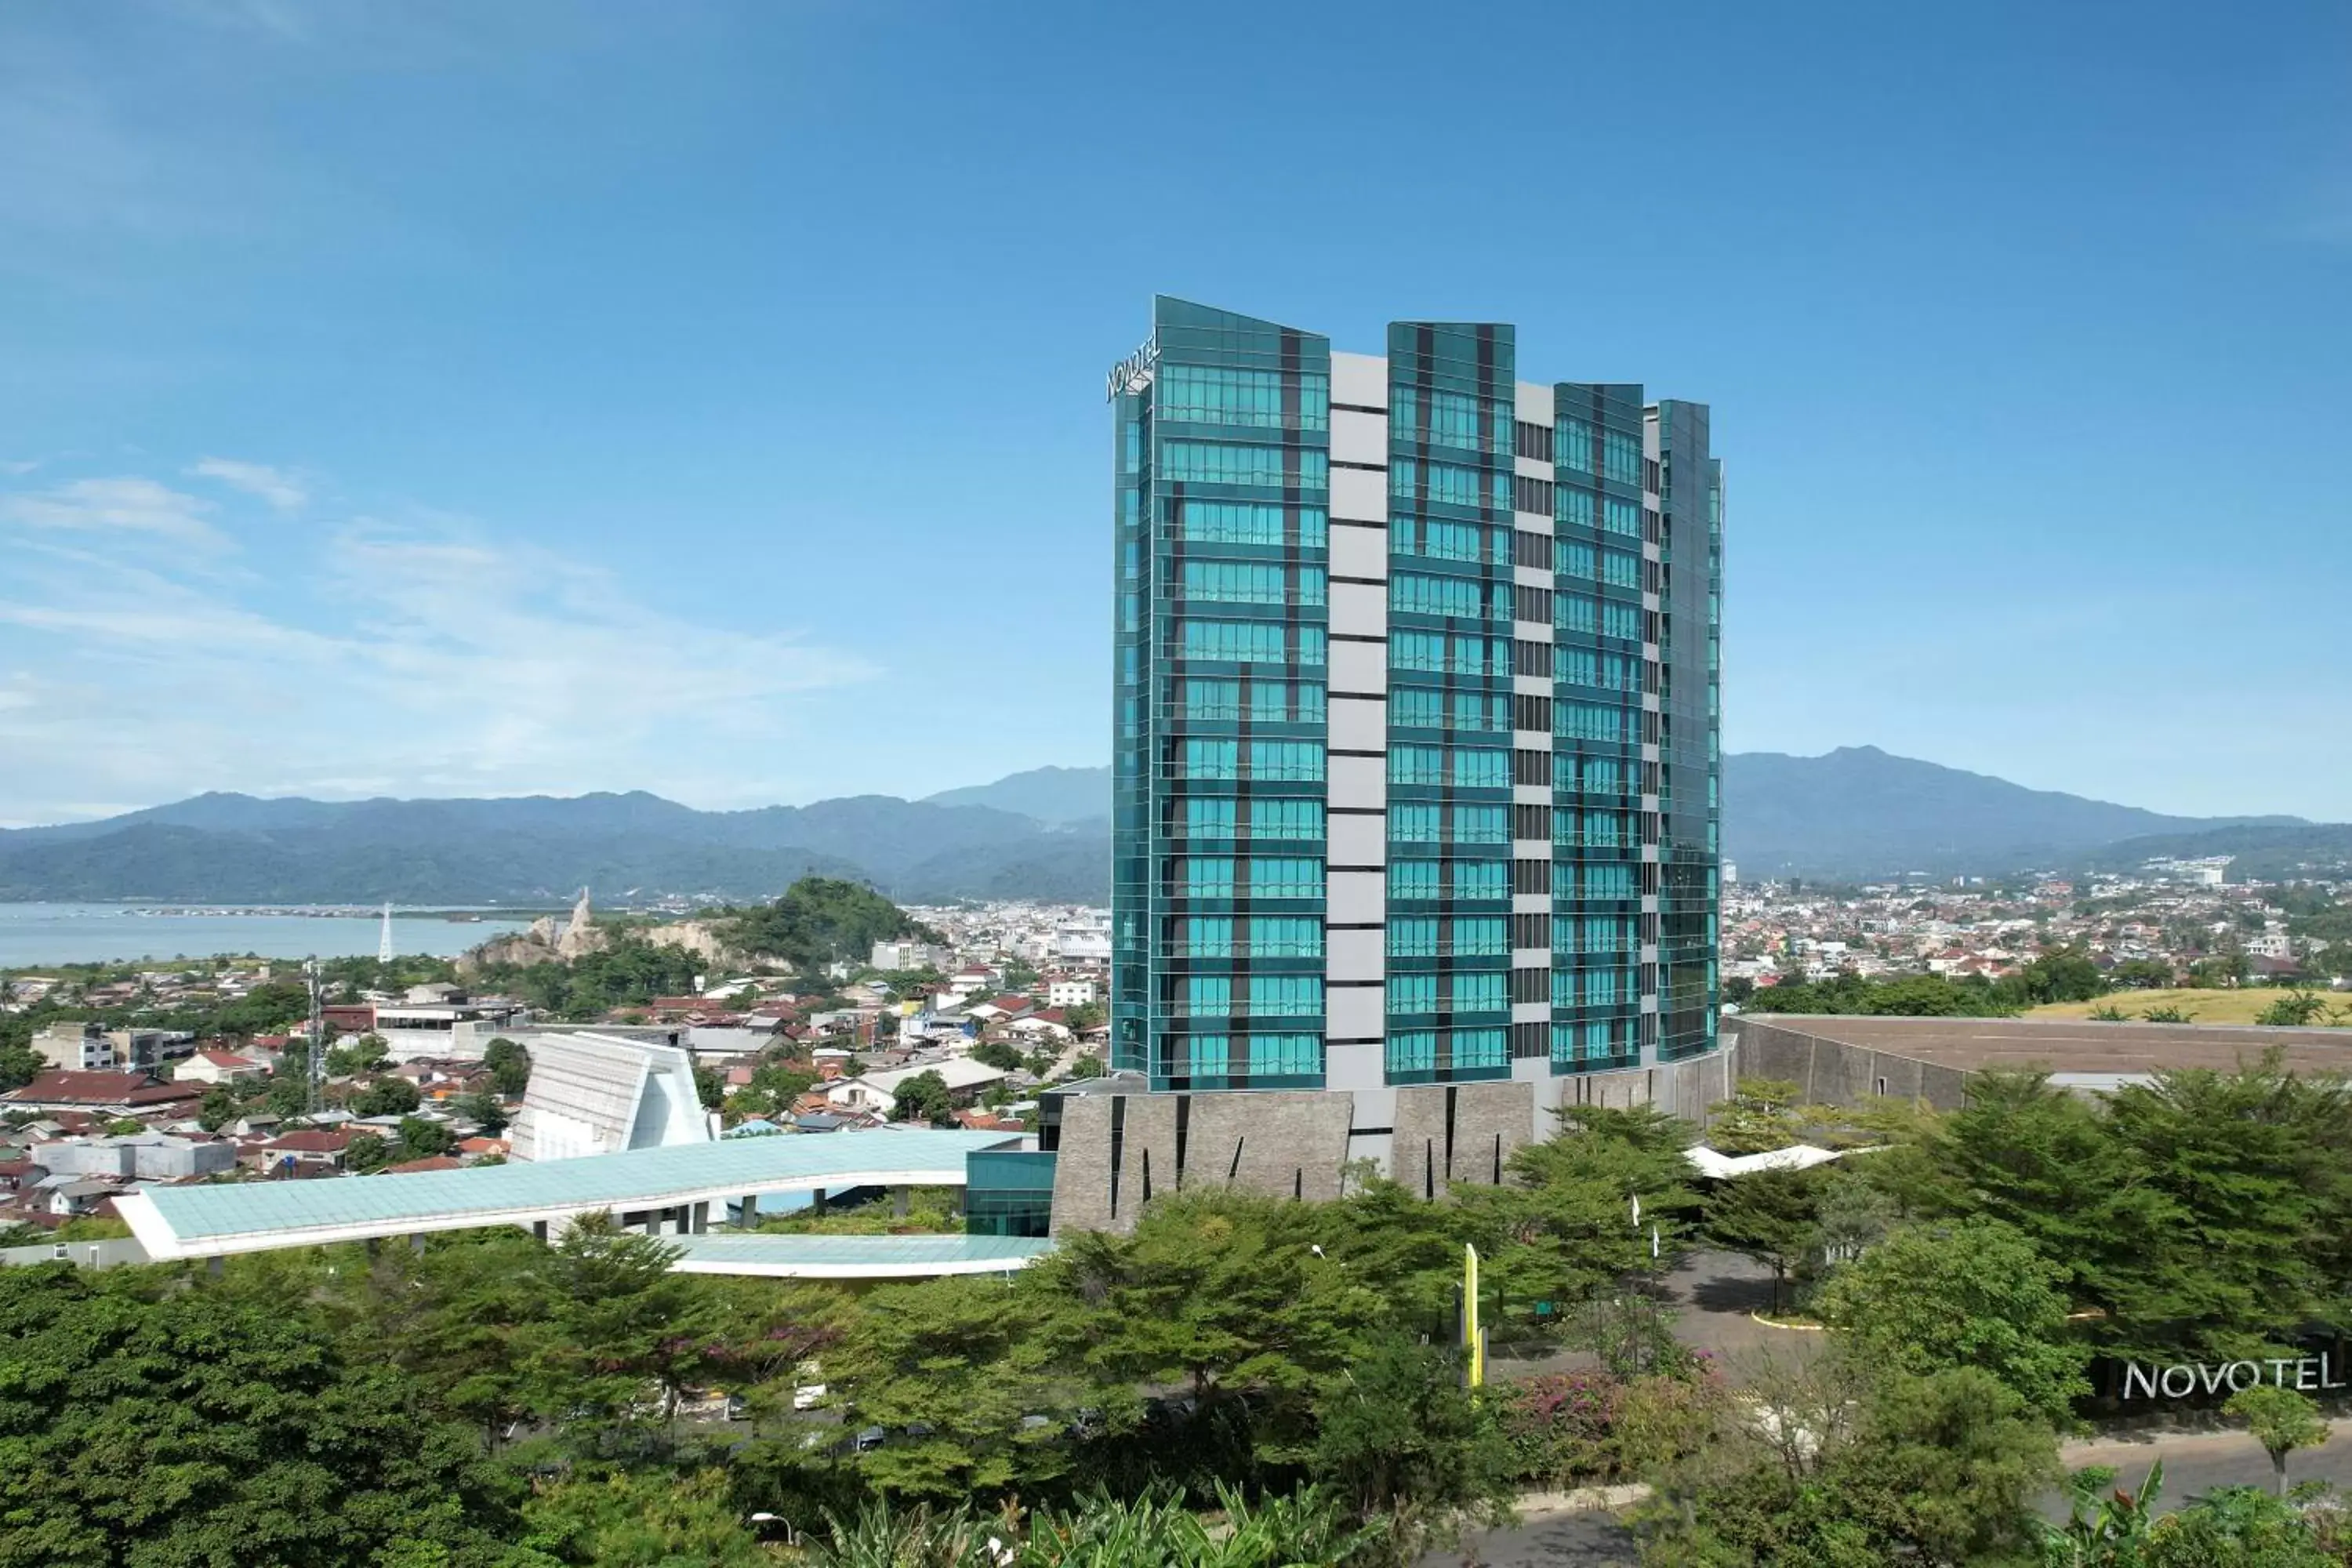 Property building in Novotel Lampung